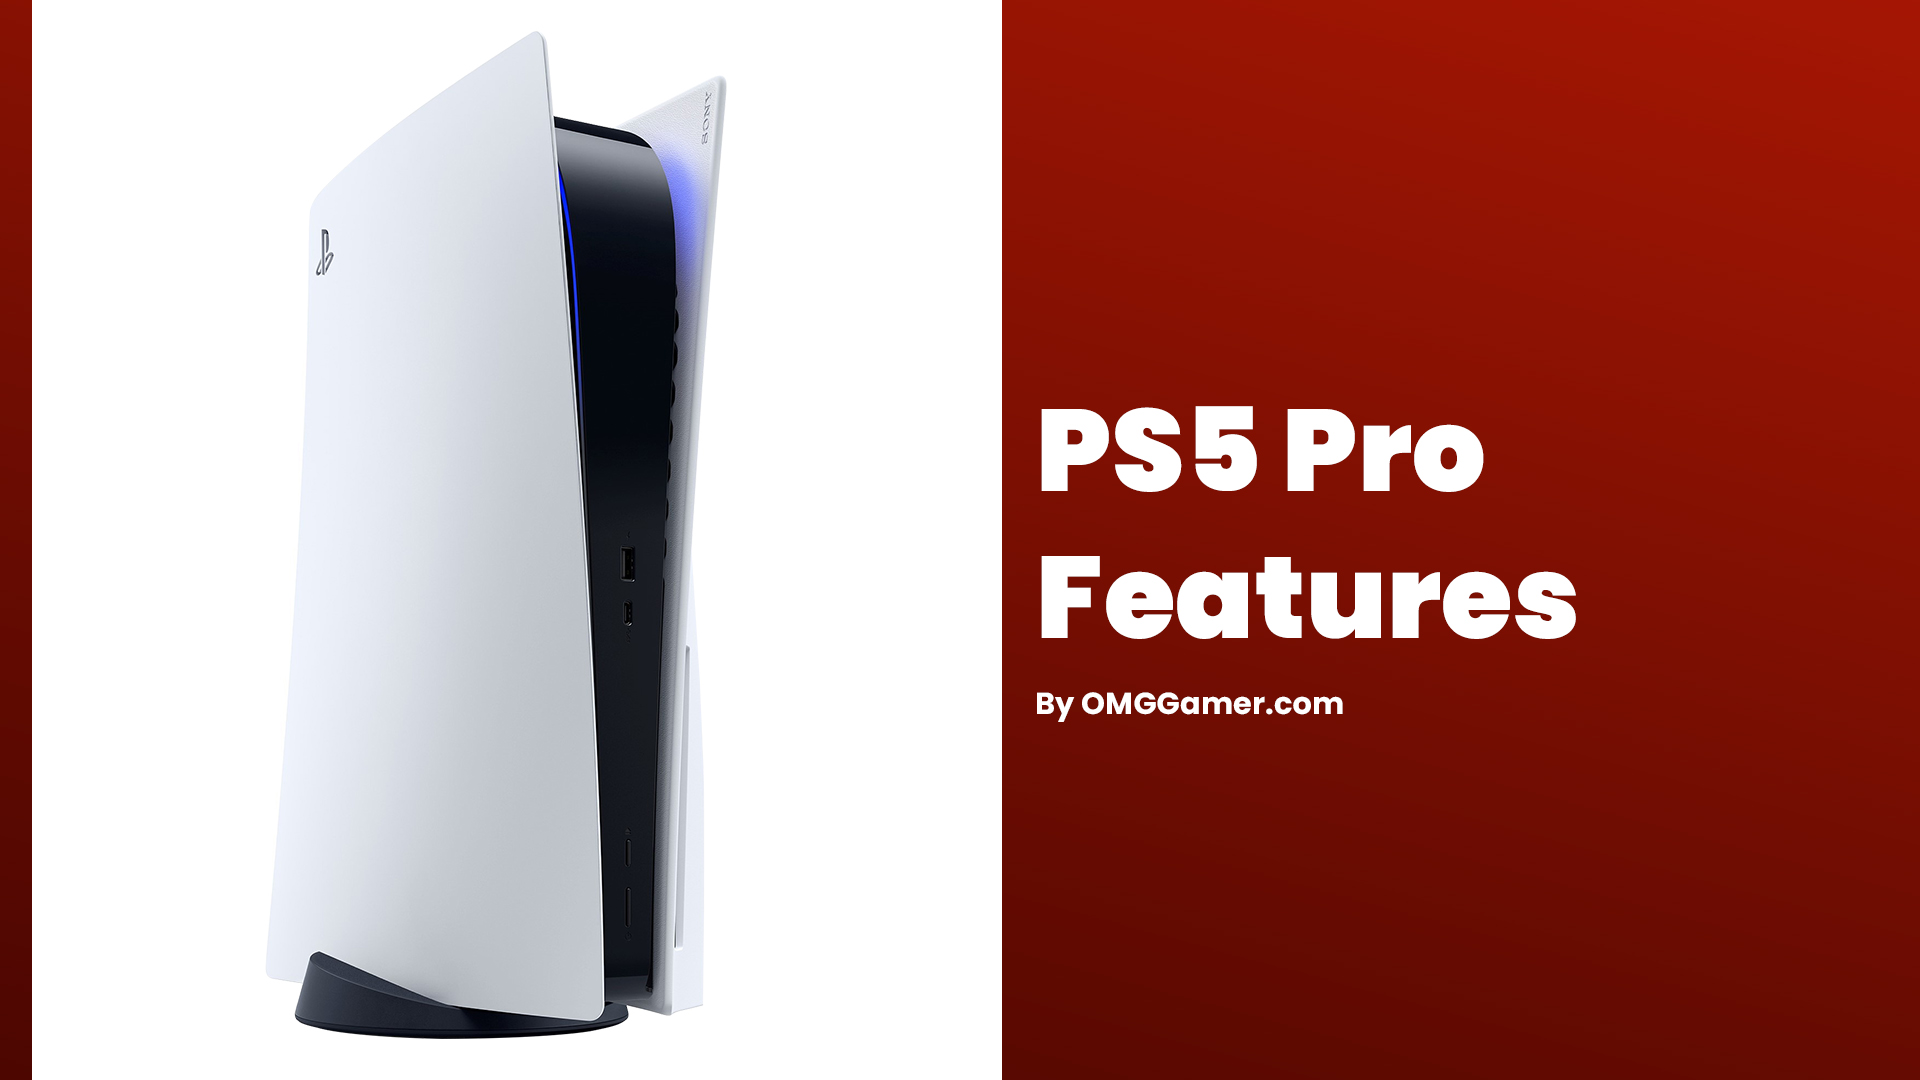 PS5 Pro Features